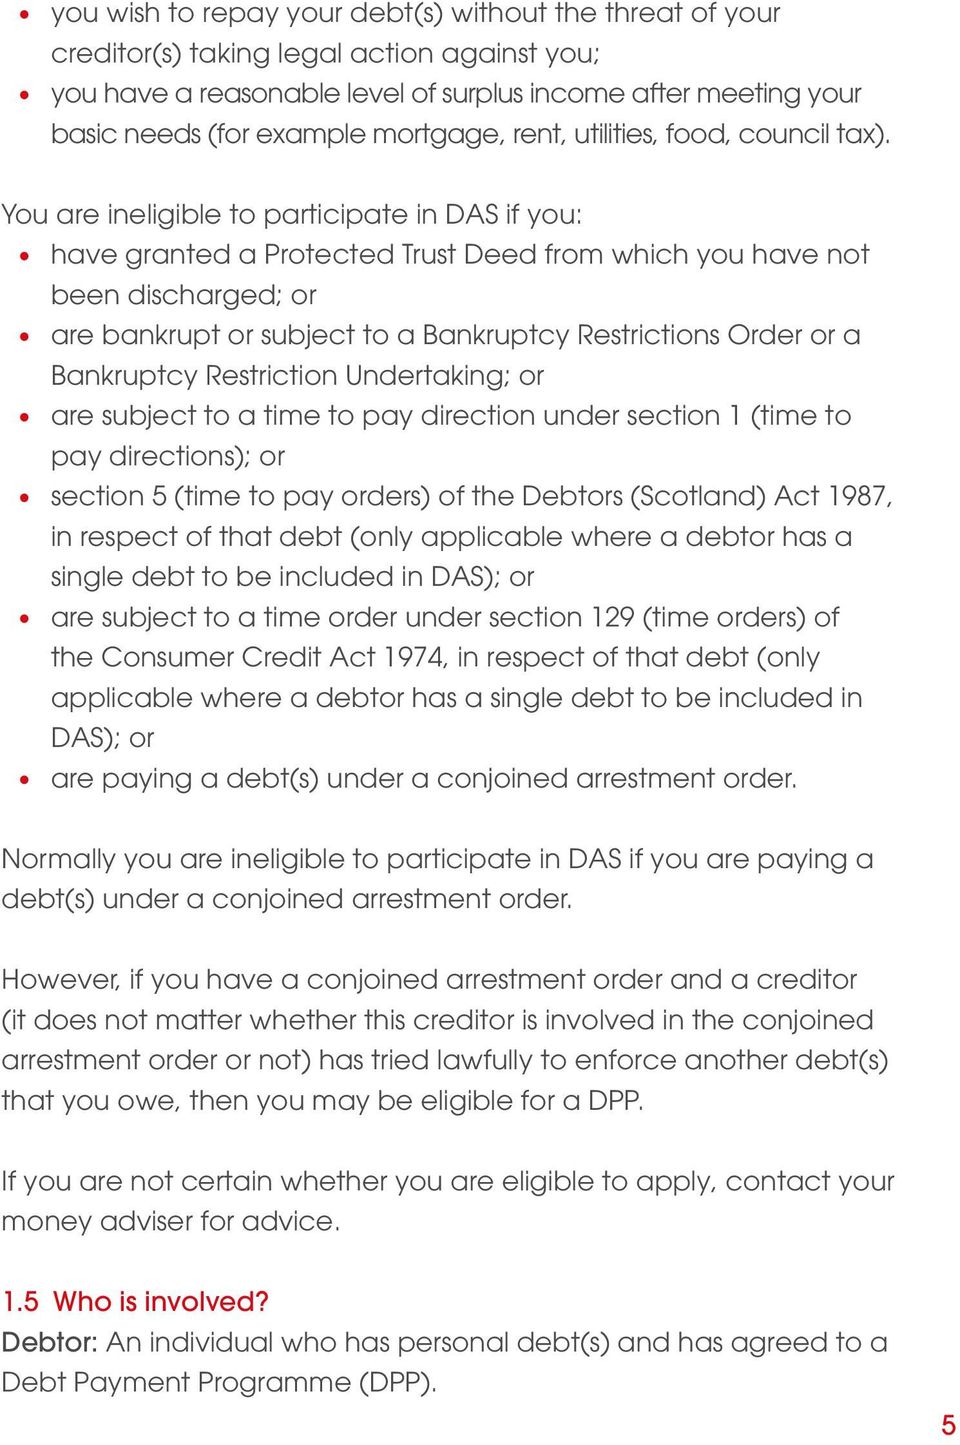 You are ineligible to participate in DAS if you: have granted a Protected Trust Deed from which you have not been discharged; or are bankrupt or subject to a Bankruptcy Restrictions Order or a